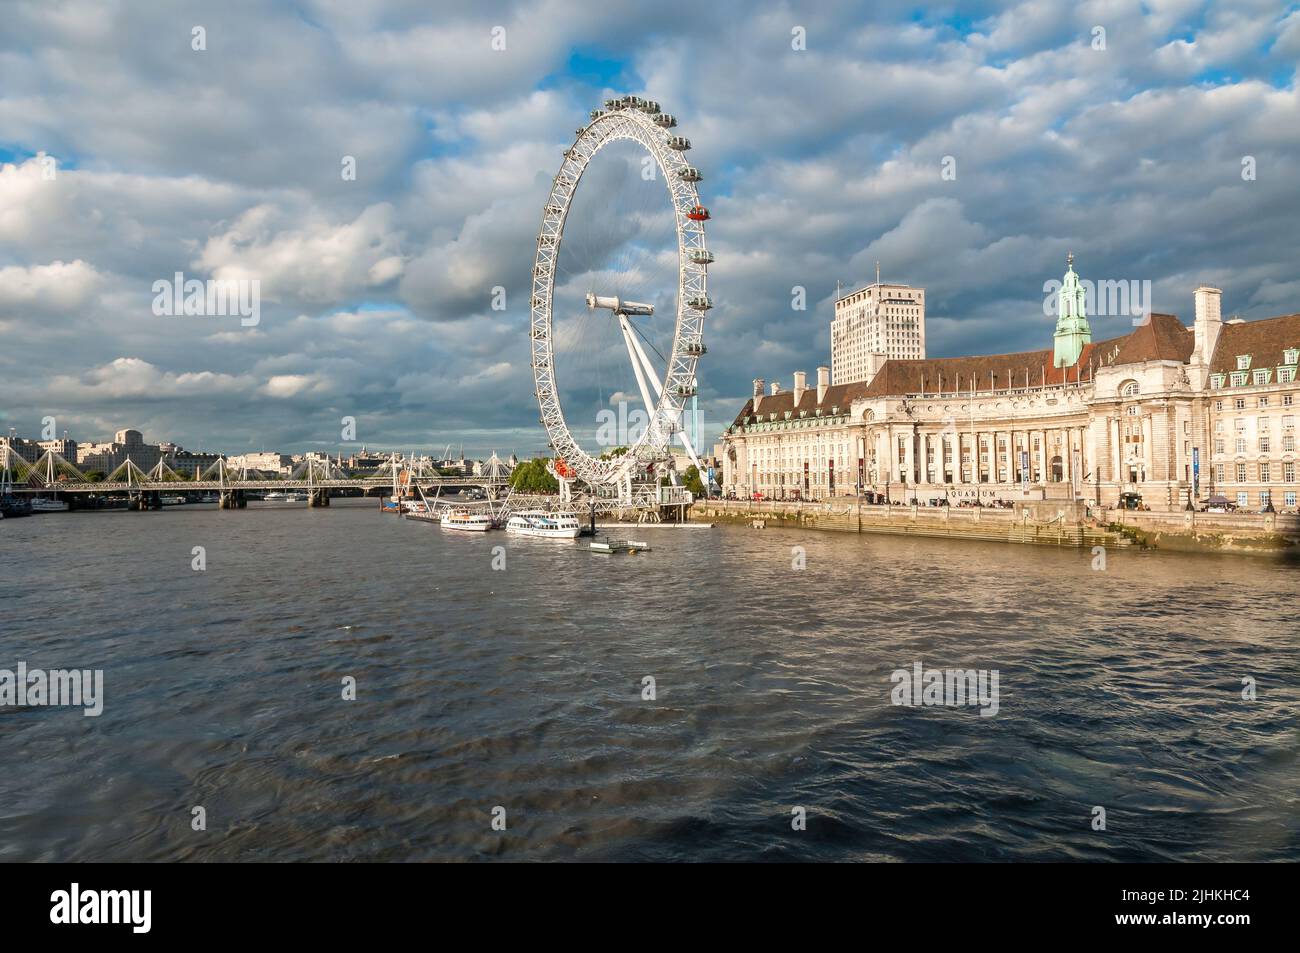 London, England, United Kingdom - September 18, 2013: View of the London Eye at sunset, is a cantilevered observation wheel . Stock Photo